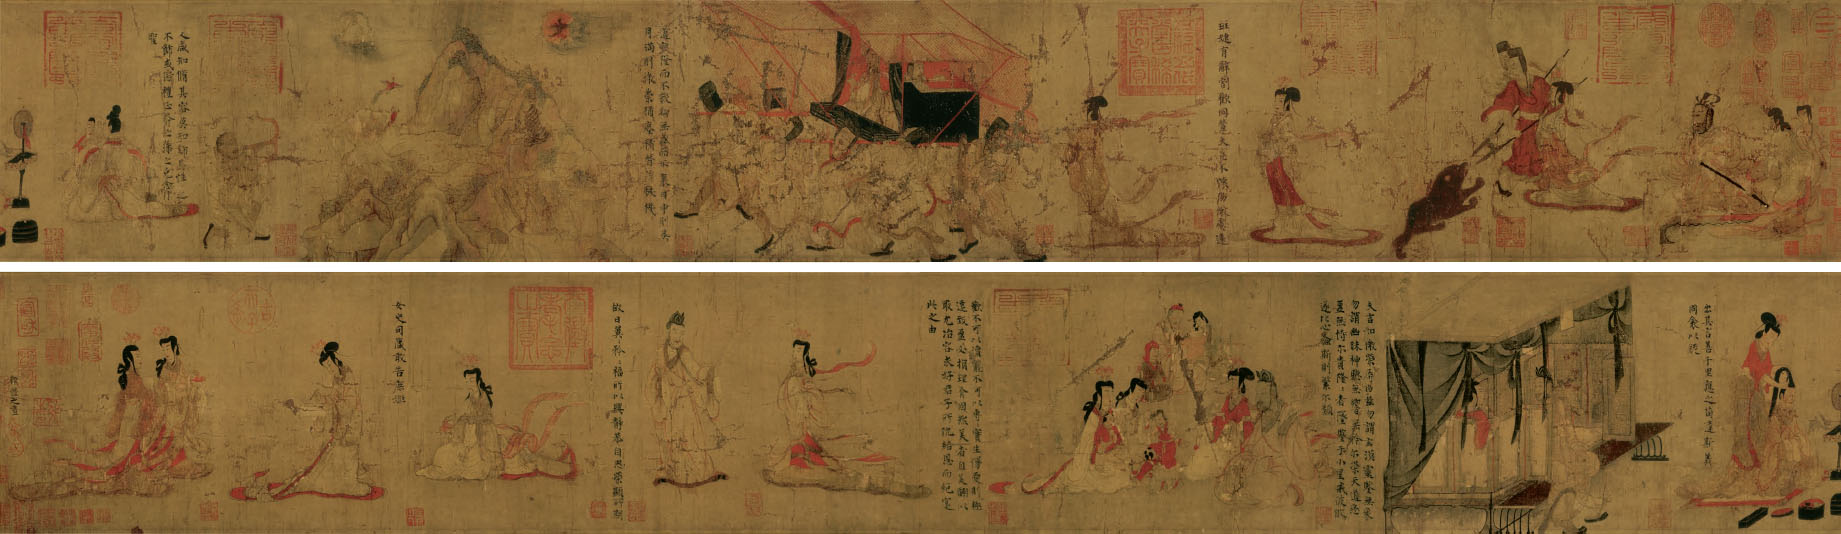 Later Gu Kaizhi used this text as the source material for painting his - photo 6